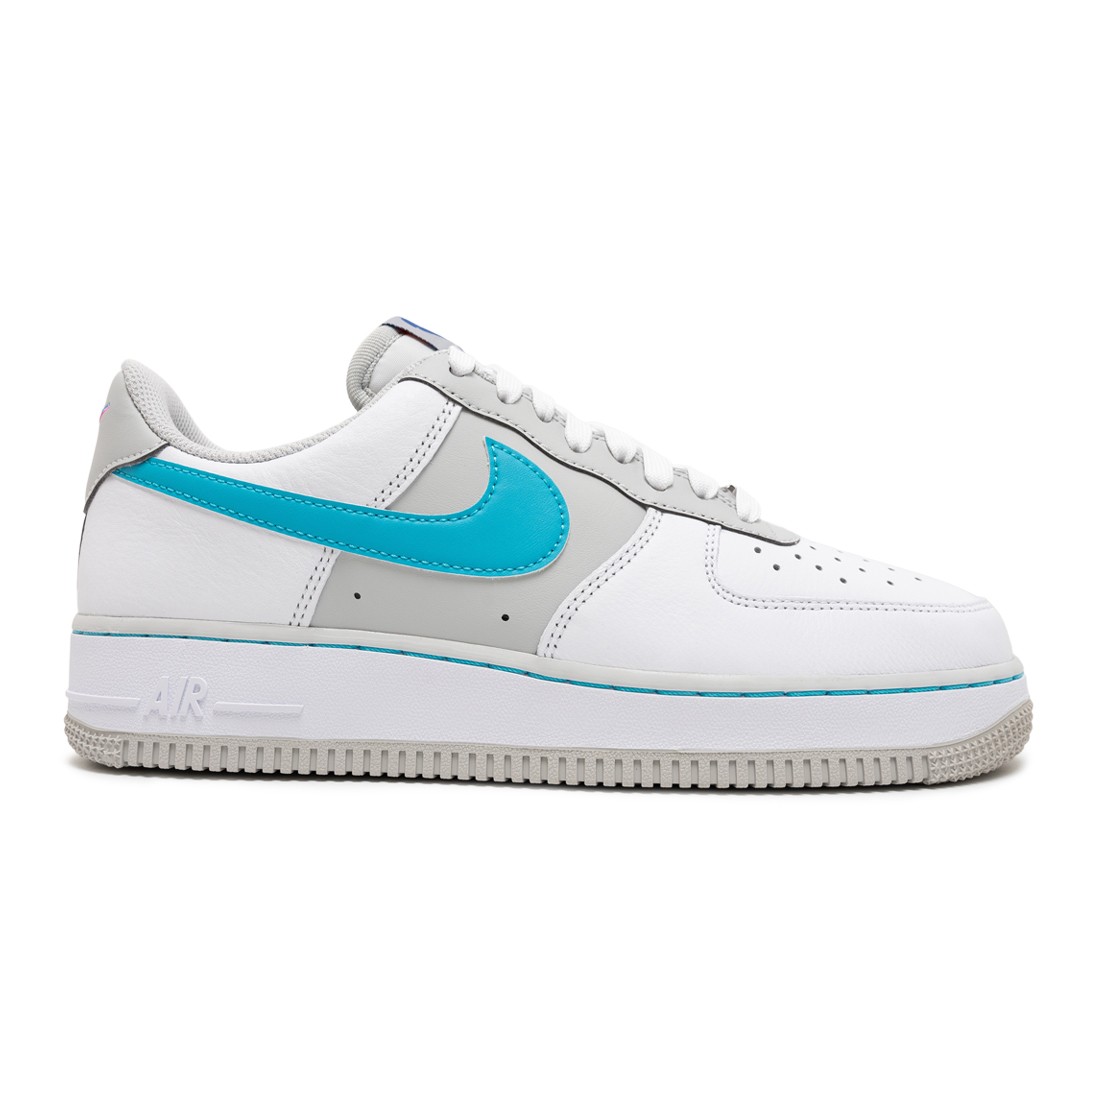 Nike Air Force 1 ‘07 LV8 Dusty Blue Void Sail Sz 11.5 DS Proof of Nike  Purchase